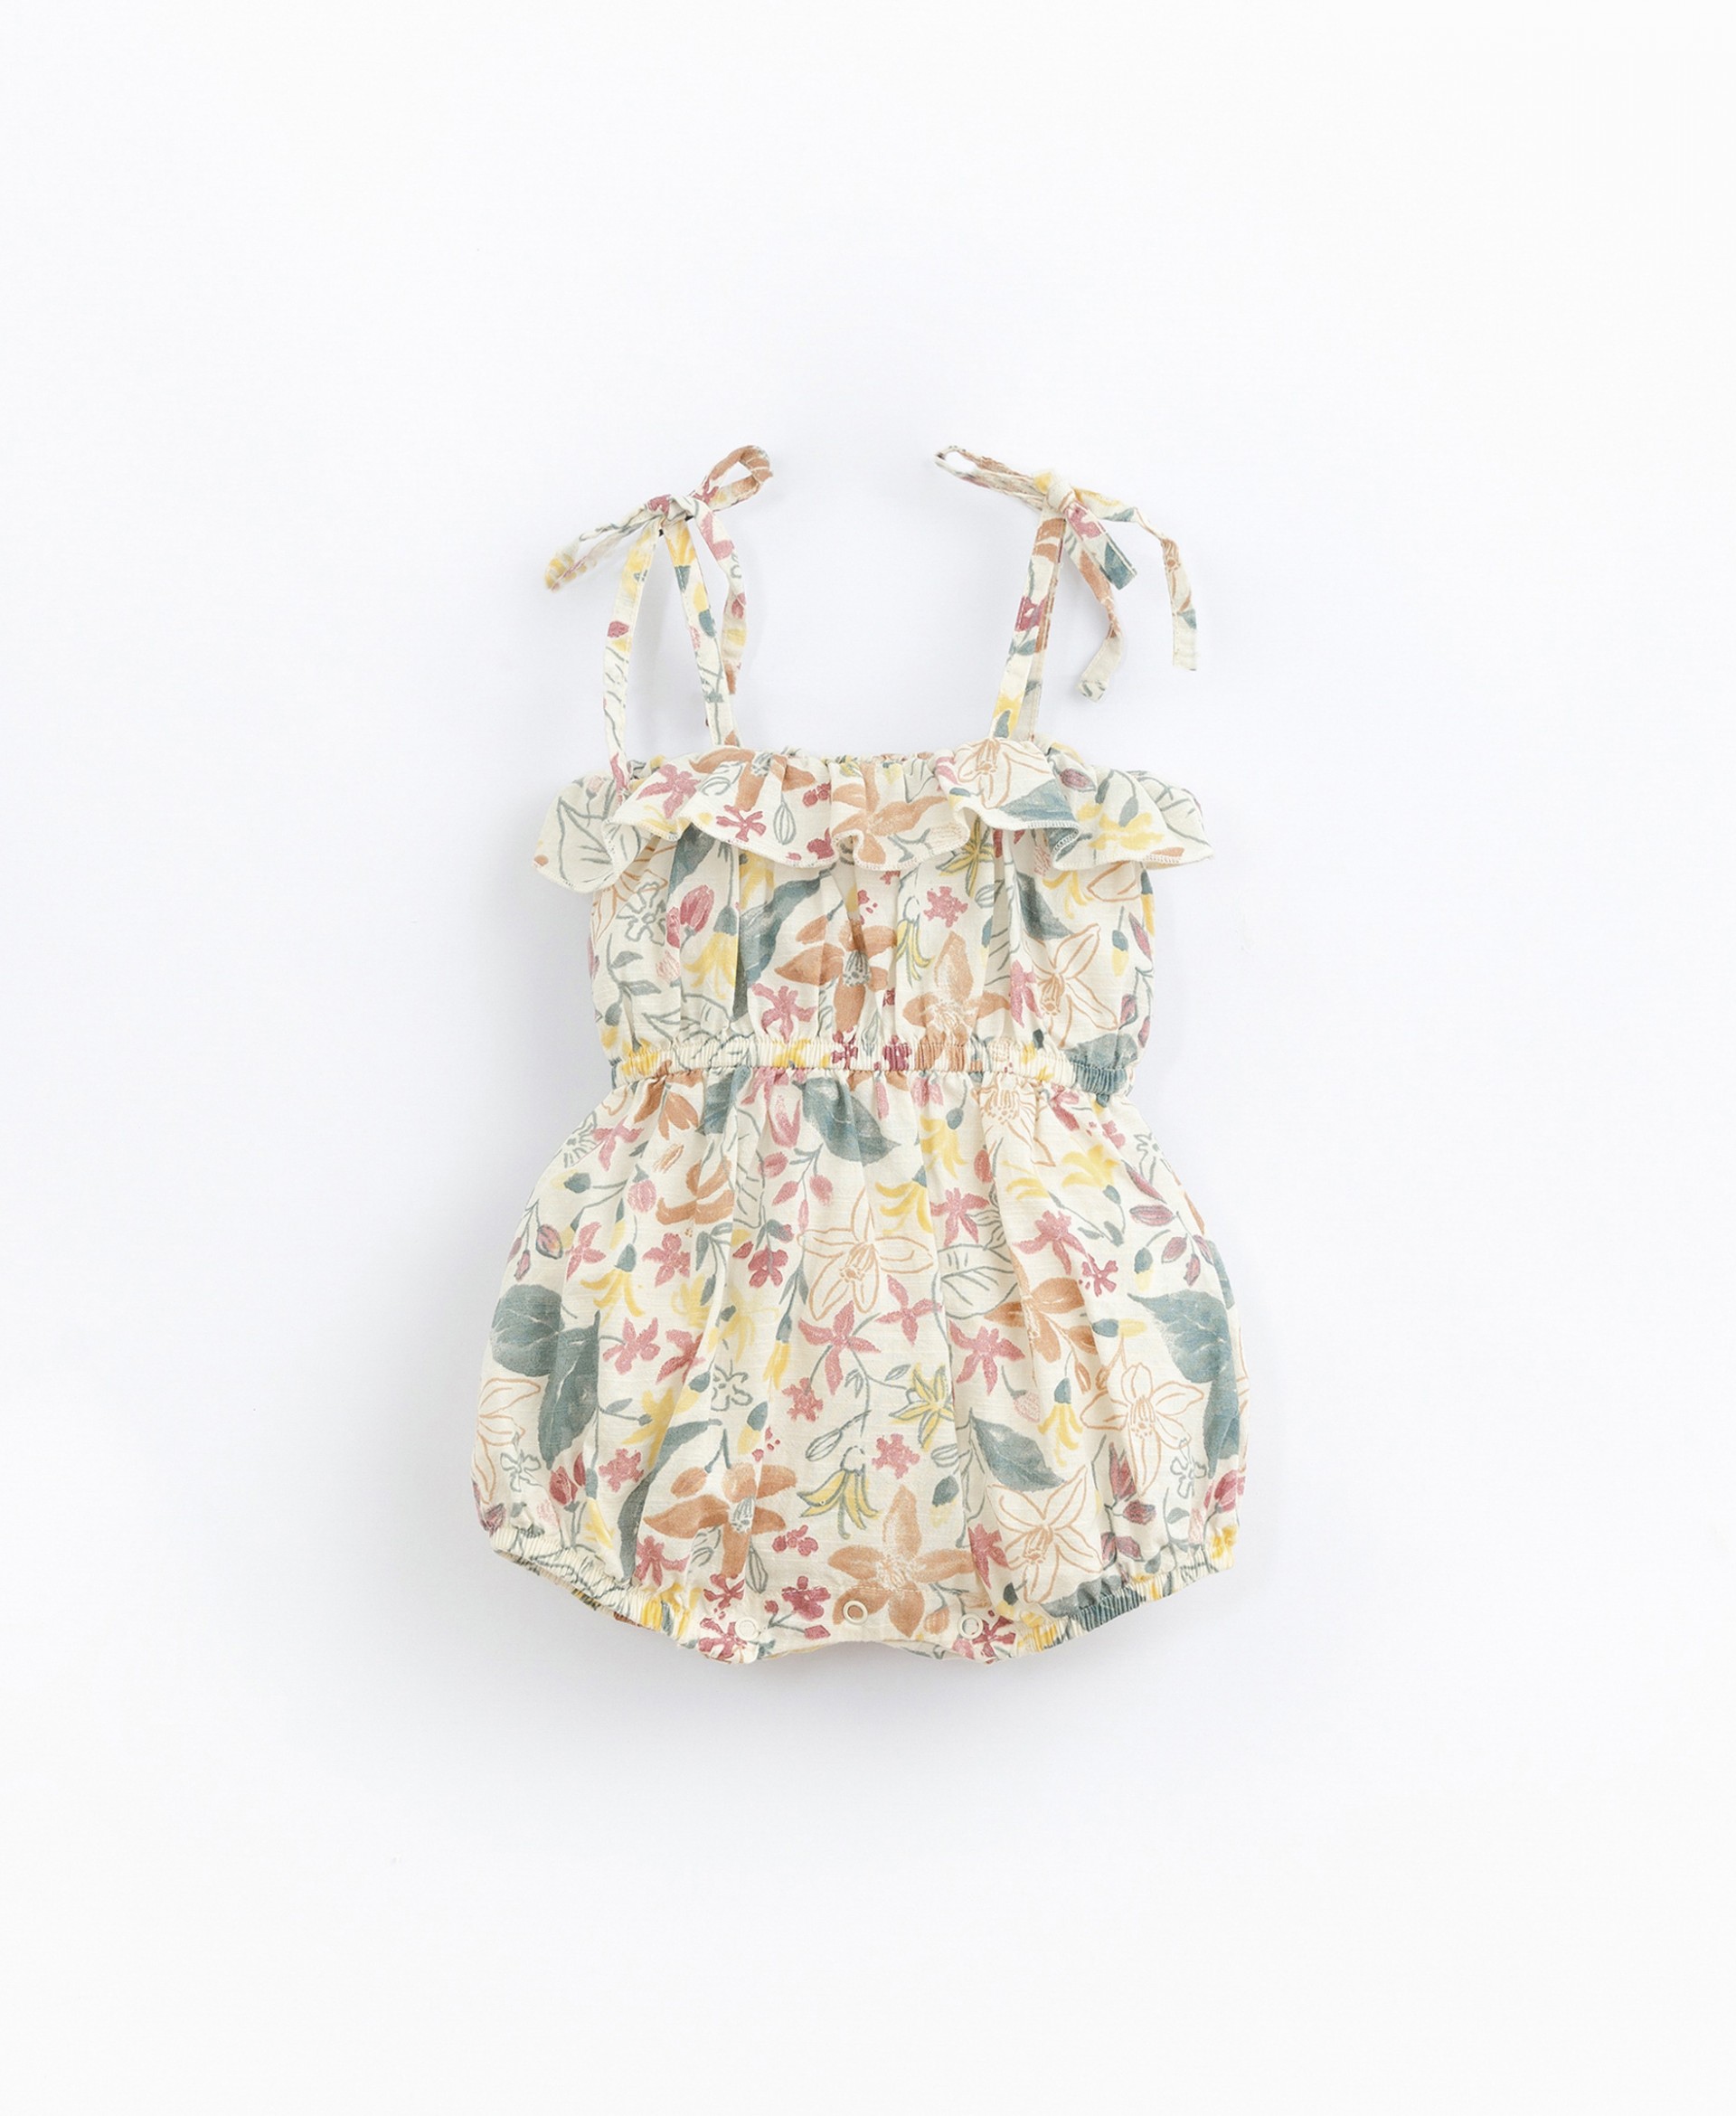 Jumpsuit in floral print fabric | Basketry